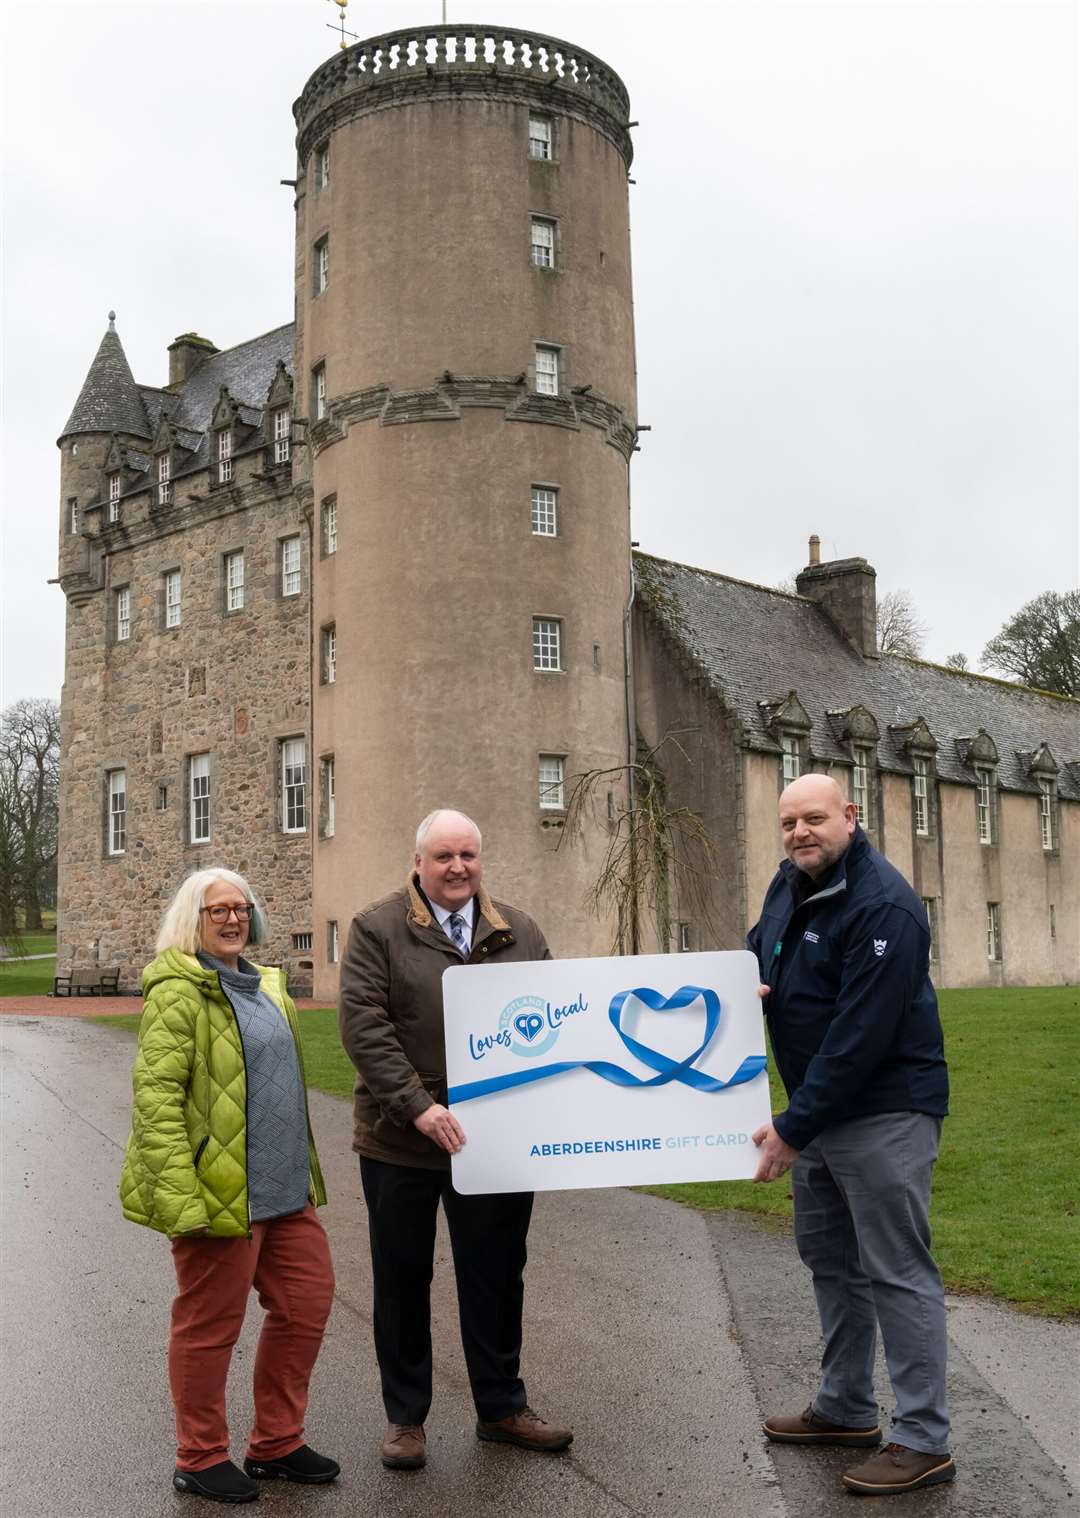 Pictured at the National Trust for Scotland’s Castle Fraser are Cllrs Alan Turner and Isobel Davidson, chair and vice-chair of our Infrastructure Services Committee, with Iain Hawkins, National Trust for Scotland Regional Director for North East